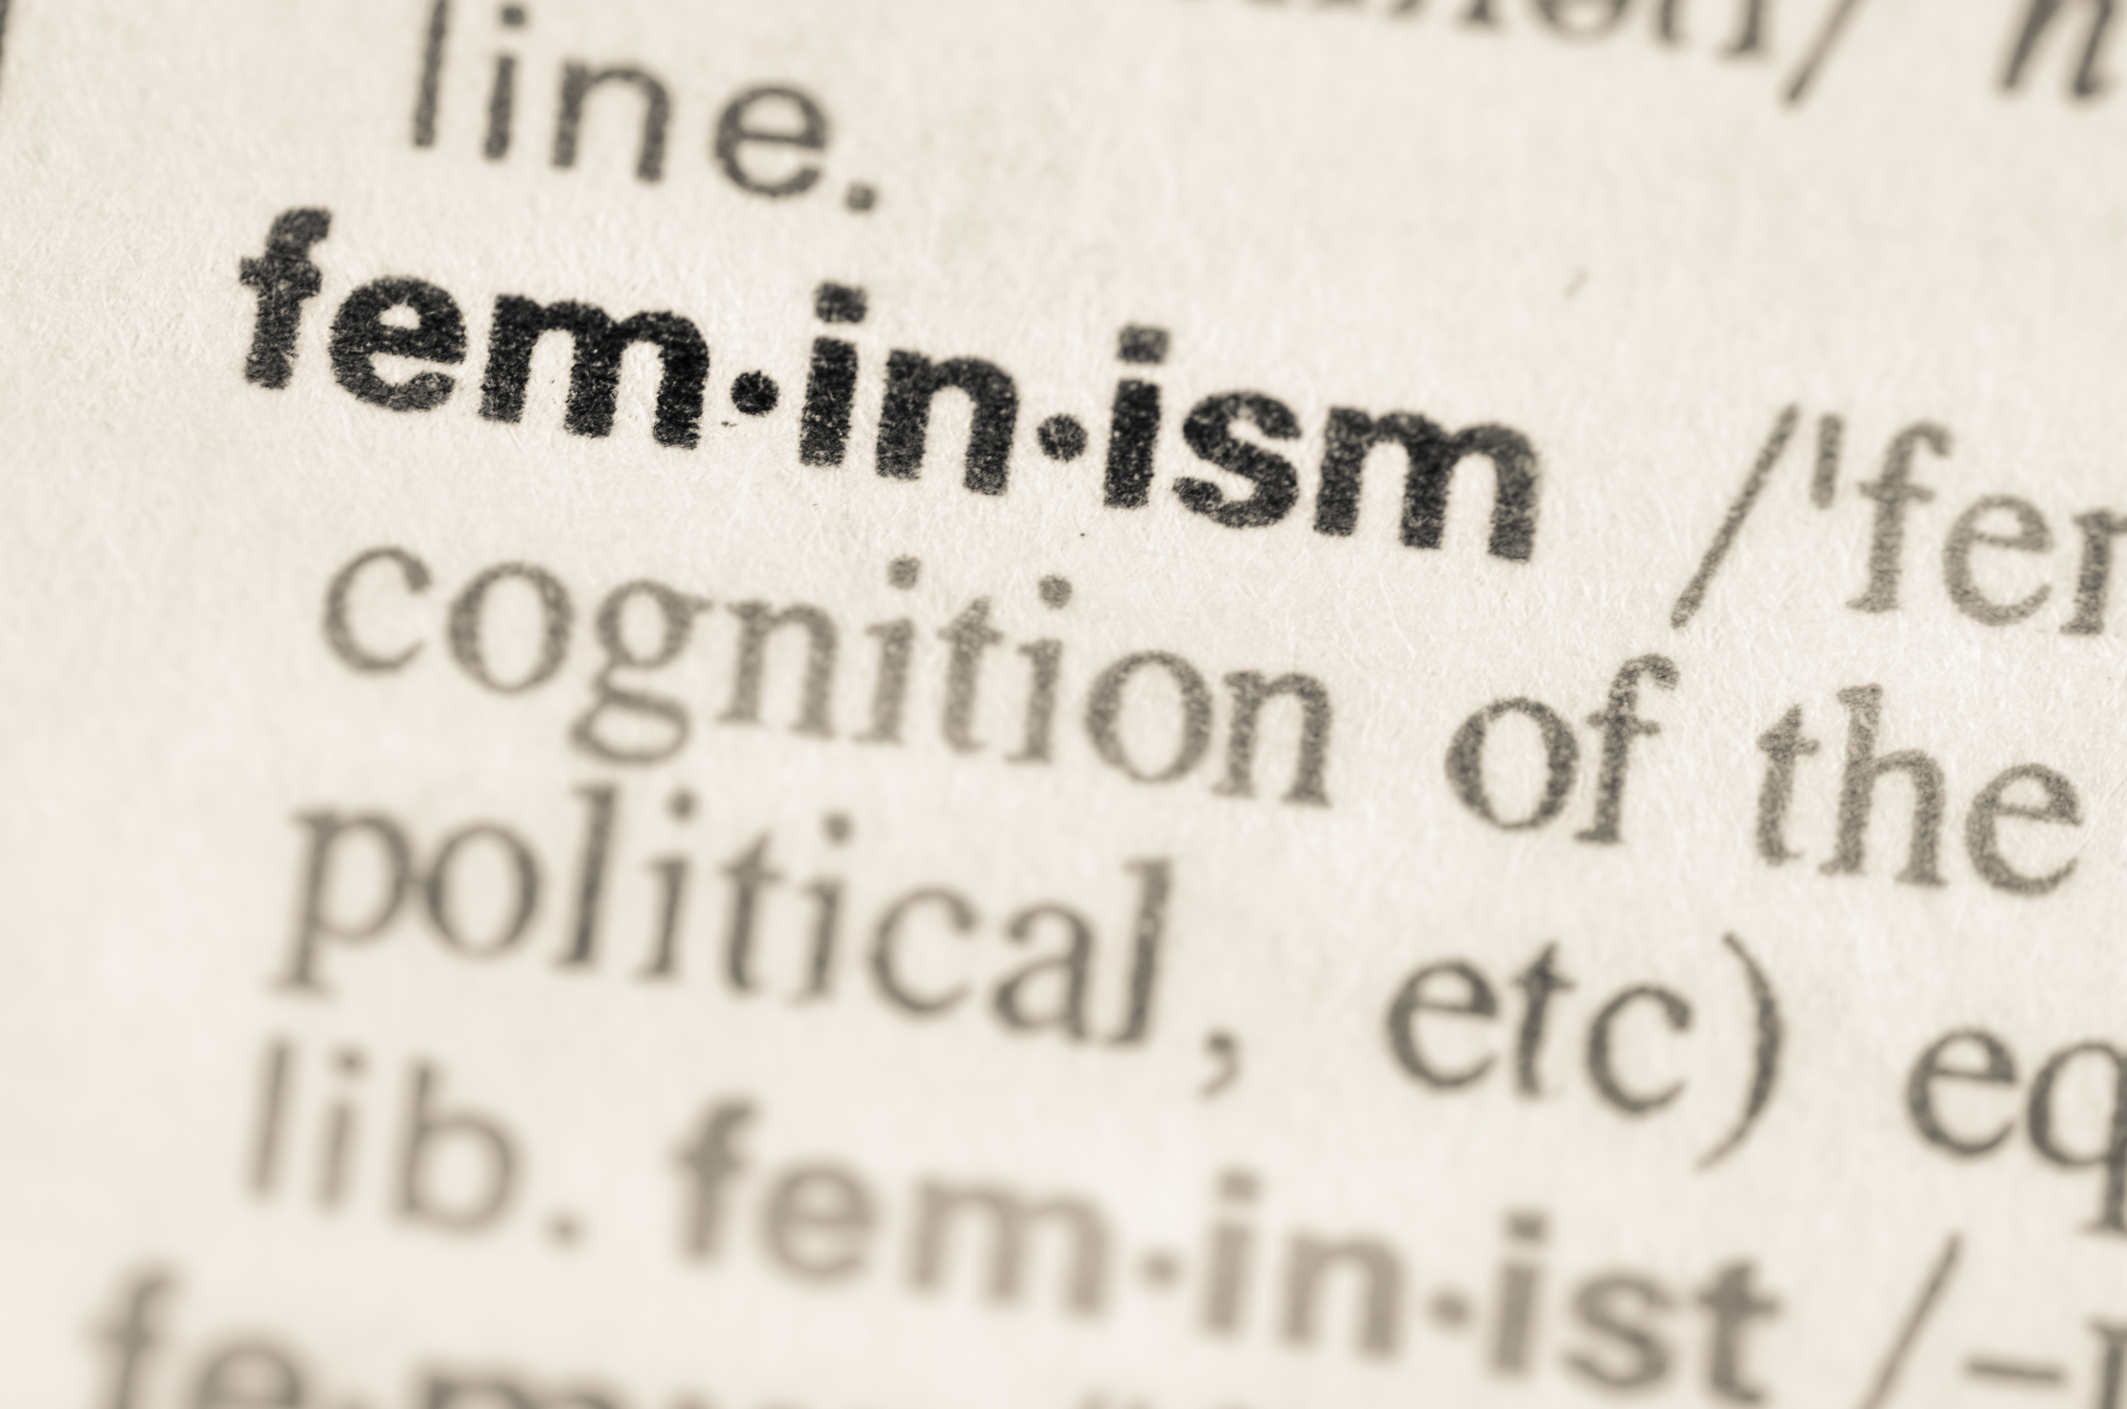 Selling Feminism How Female Empowerment Campaigns Employ Postfeminist